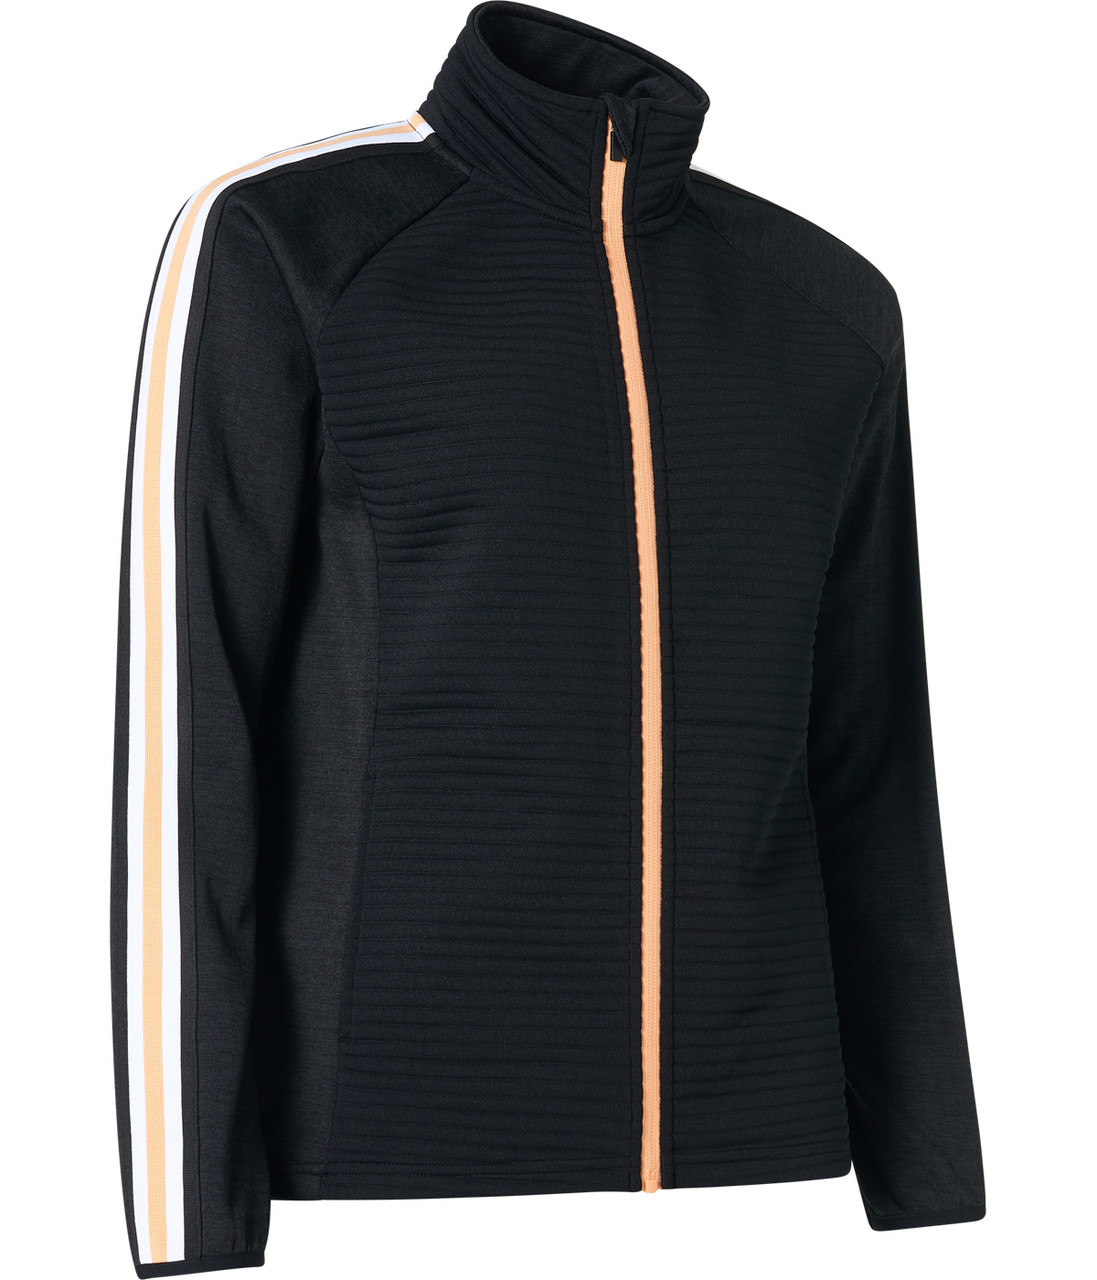 udslettelse Mockingbird Ved Abacus Sportswear Turnberry 3D Stripe Fullzip Women's Golf Cardigan - Black  - Fore Ladies - Golf Dresses and Clothes, Tennis Skirts and Outfits, and  Fashionable Activewear